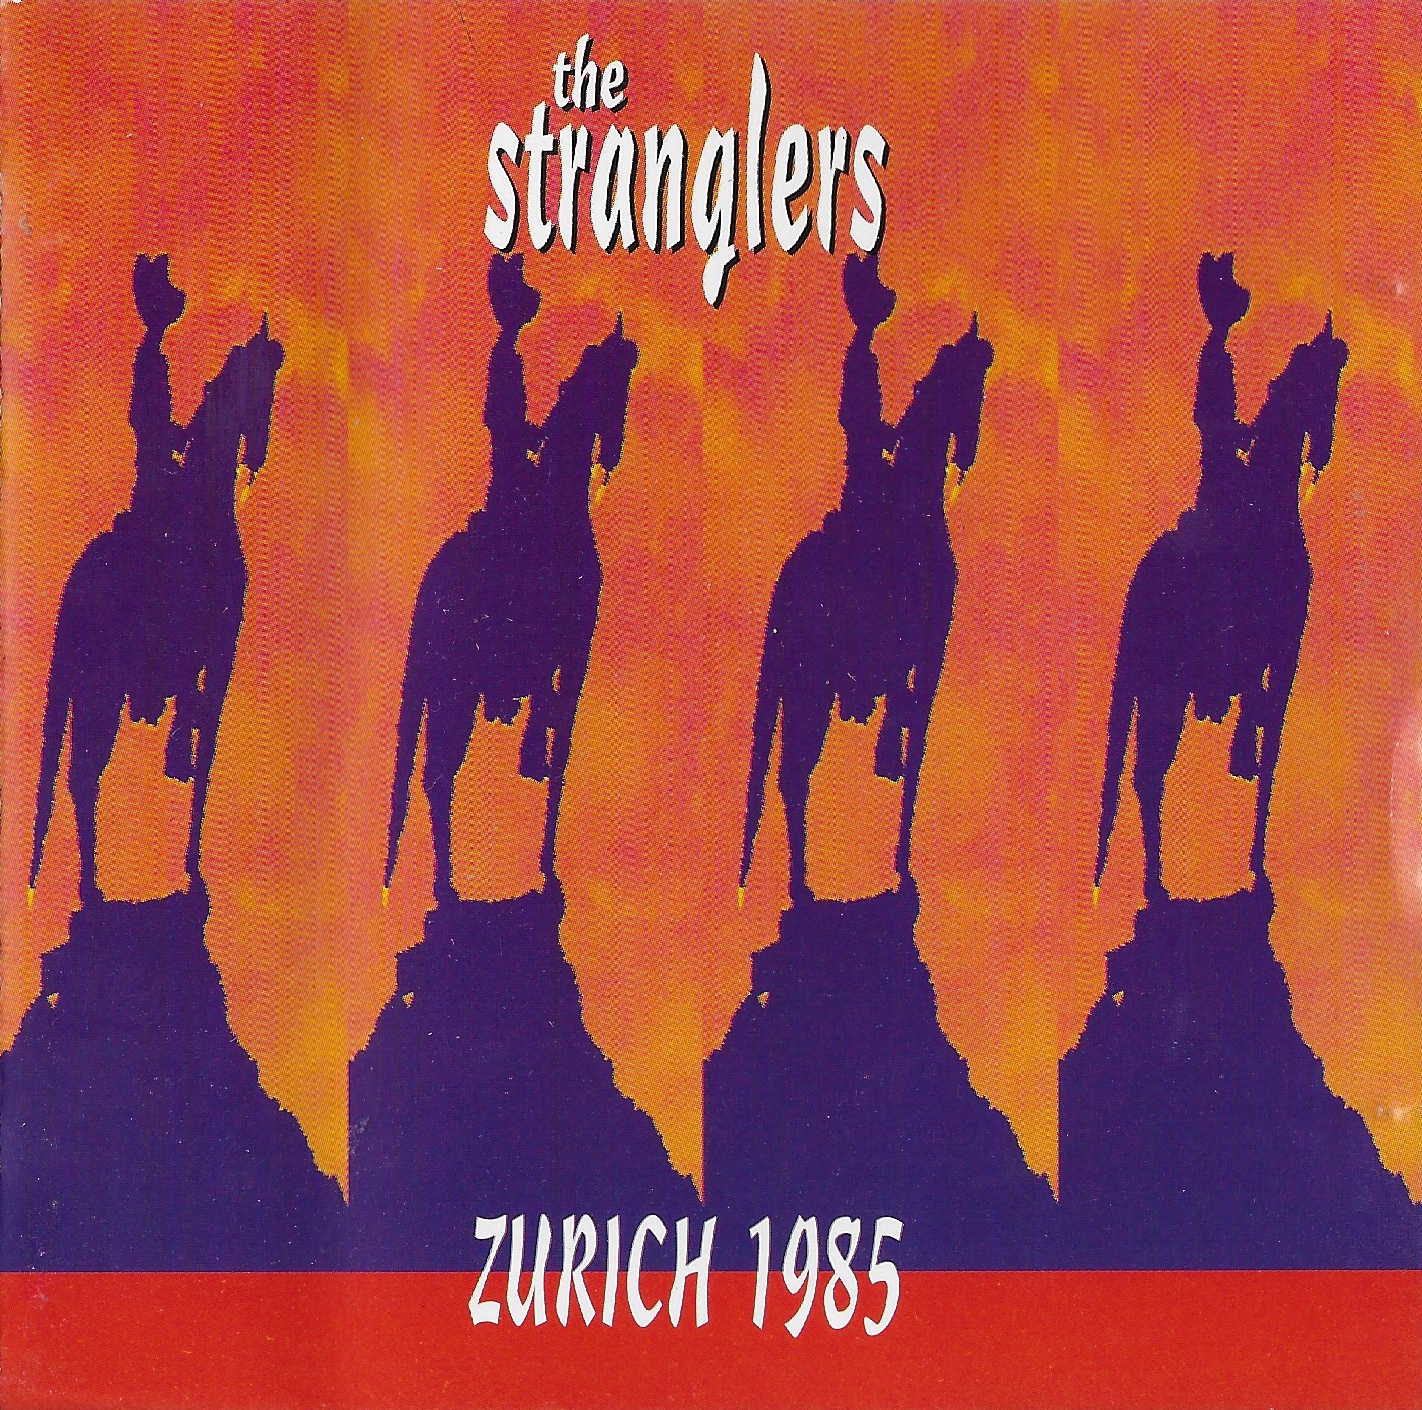 Picture of RFCD 1212 Zurich 1985 by artist The Stranglers